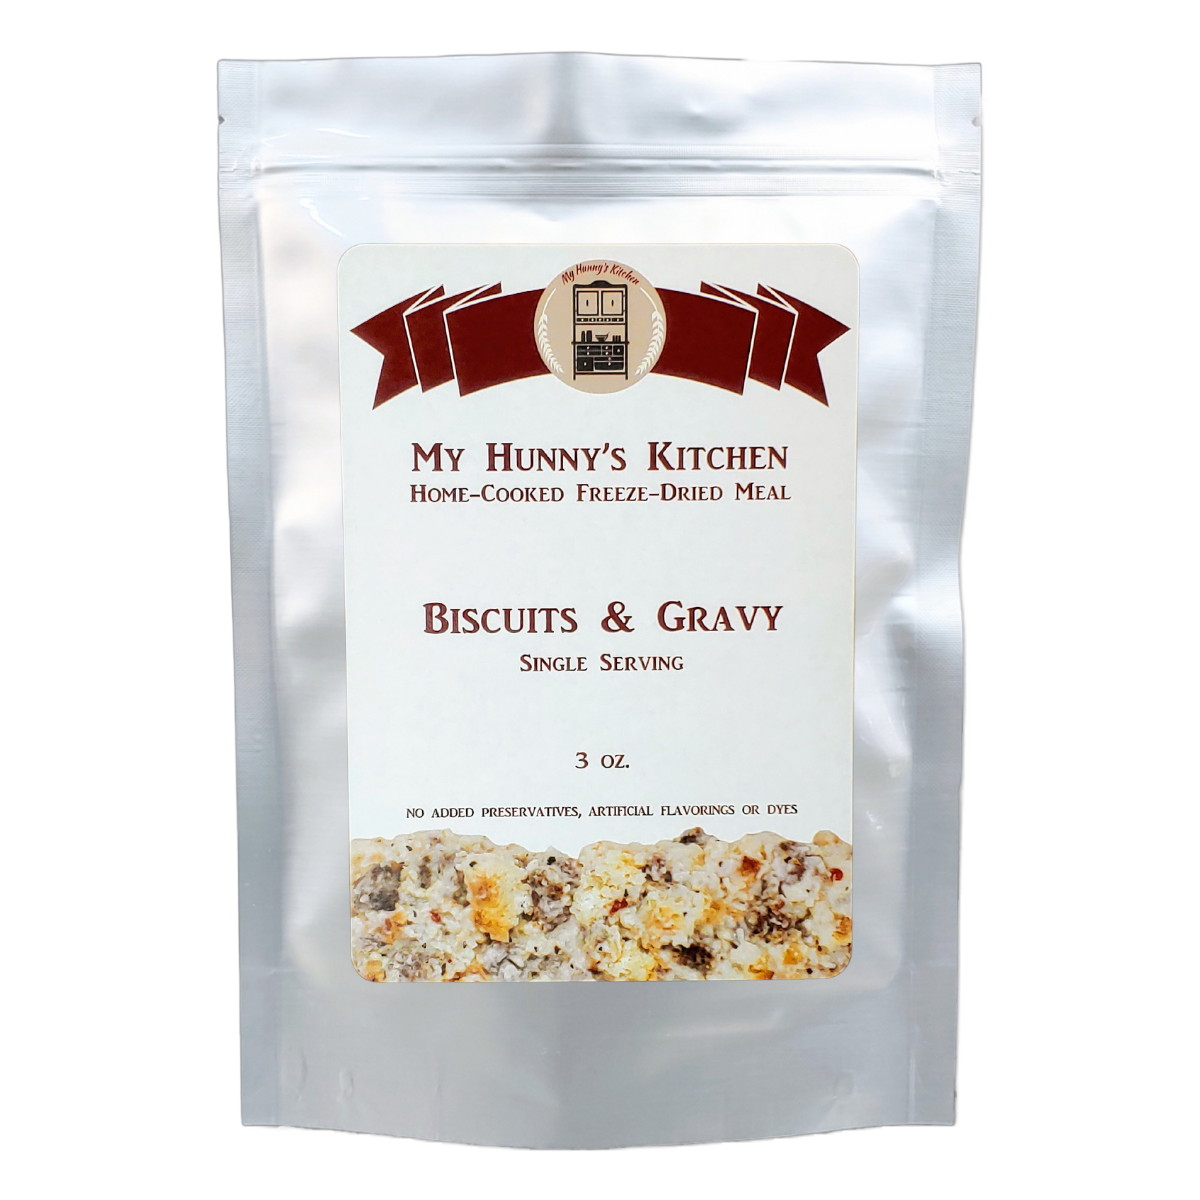 Biscuits and Gravy Freeze Dried Meal packaging front view